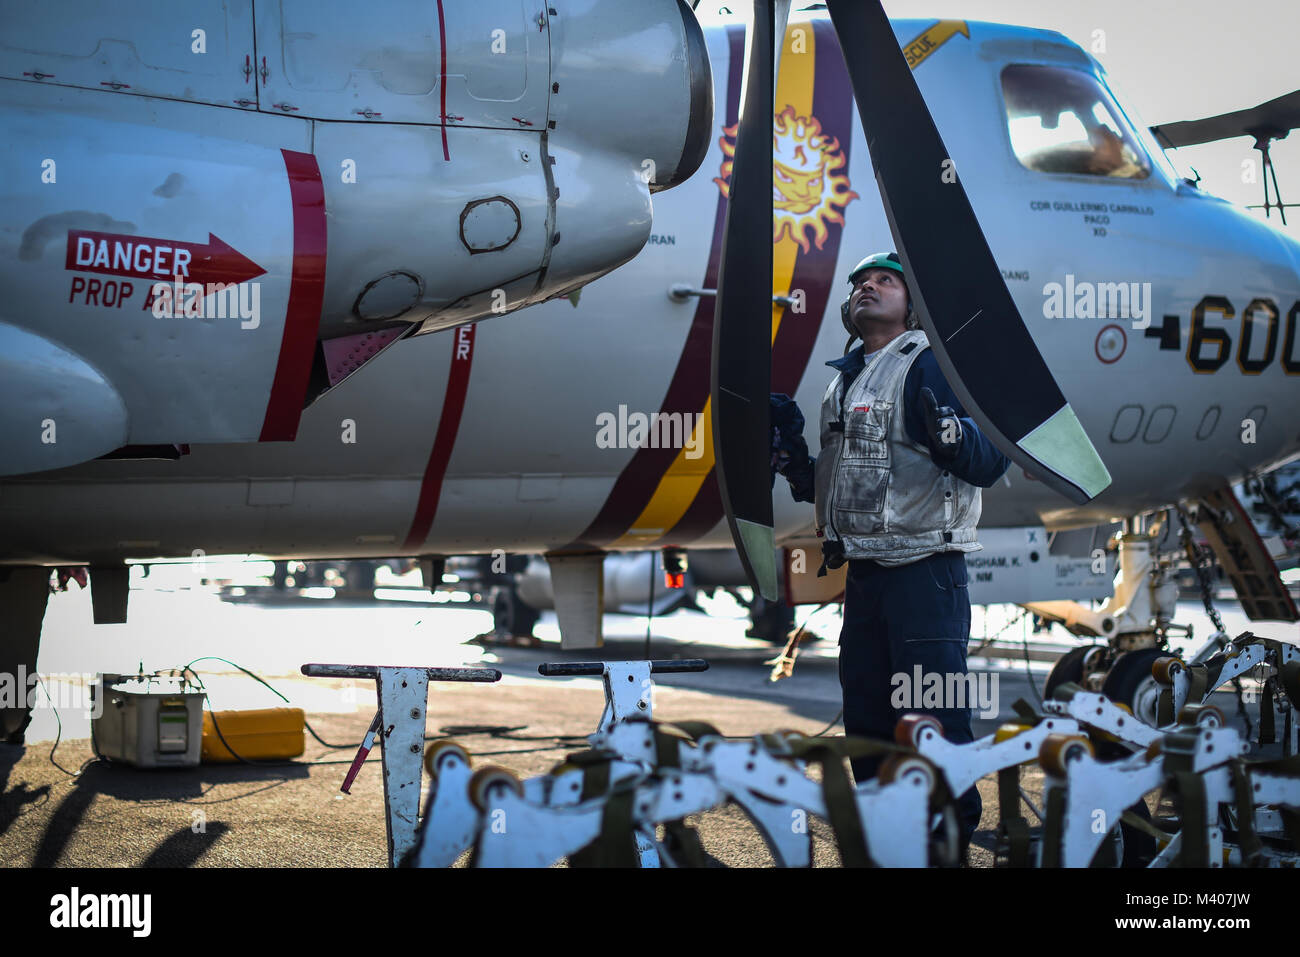 180208-N-VN584-1317 ARABIAN GULF (Feb. 8, 2018) Aviation Machinist’s Mate 2nd Class Bhakta Siwa, assigned to the Sunkings of Carrier Airborne Early Warning Squadron (VAW) 116, checks the propellers of an E-2C Hawkeye on the flight deck of the aircraft carrier USS Theodore Roosevelt (CVN 71). Theodore Roosevelt and its carrier strike group are deployed to the U.S. 5th Fleet area of operations in support of maritime security operations to reassure allies and partners and preserve the freedom of navigation and the free flow of commerce in the region. (U.S. Navy photo by Mass Communication Special Stock Photo